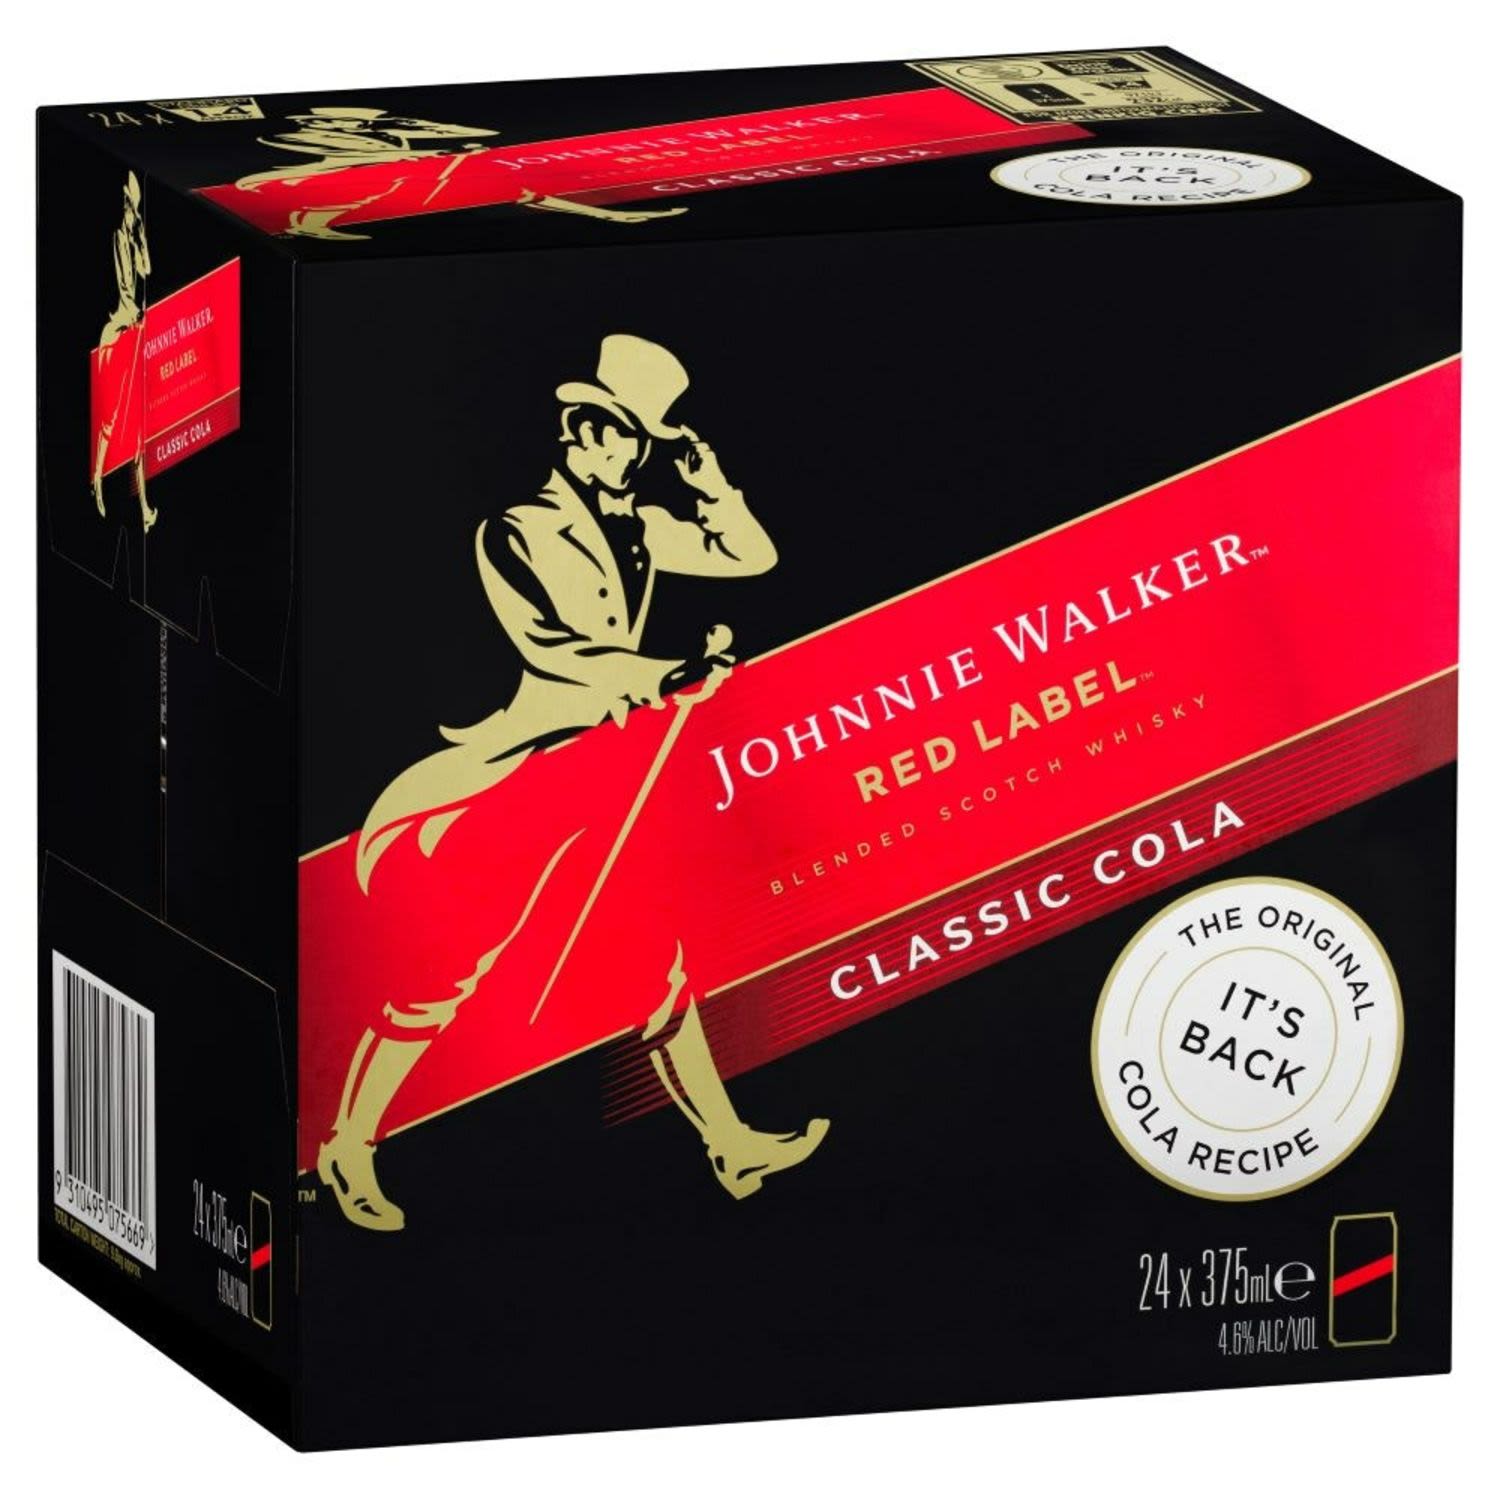 Johnnie Walker Red Label & Cola 4.6% Can 375mL 24 Pack Cube